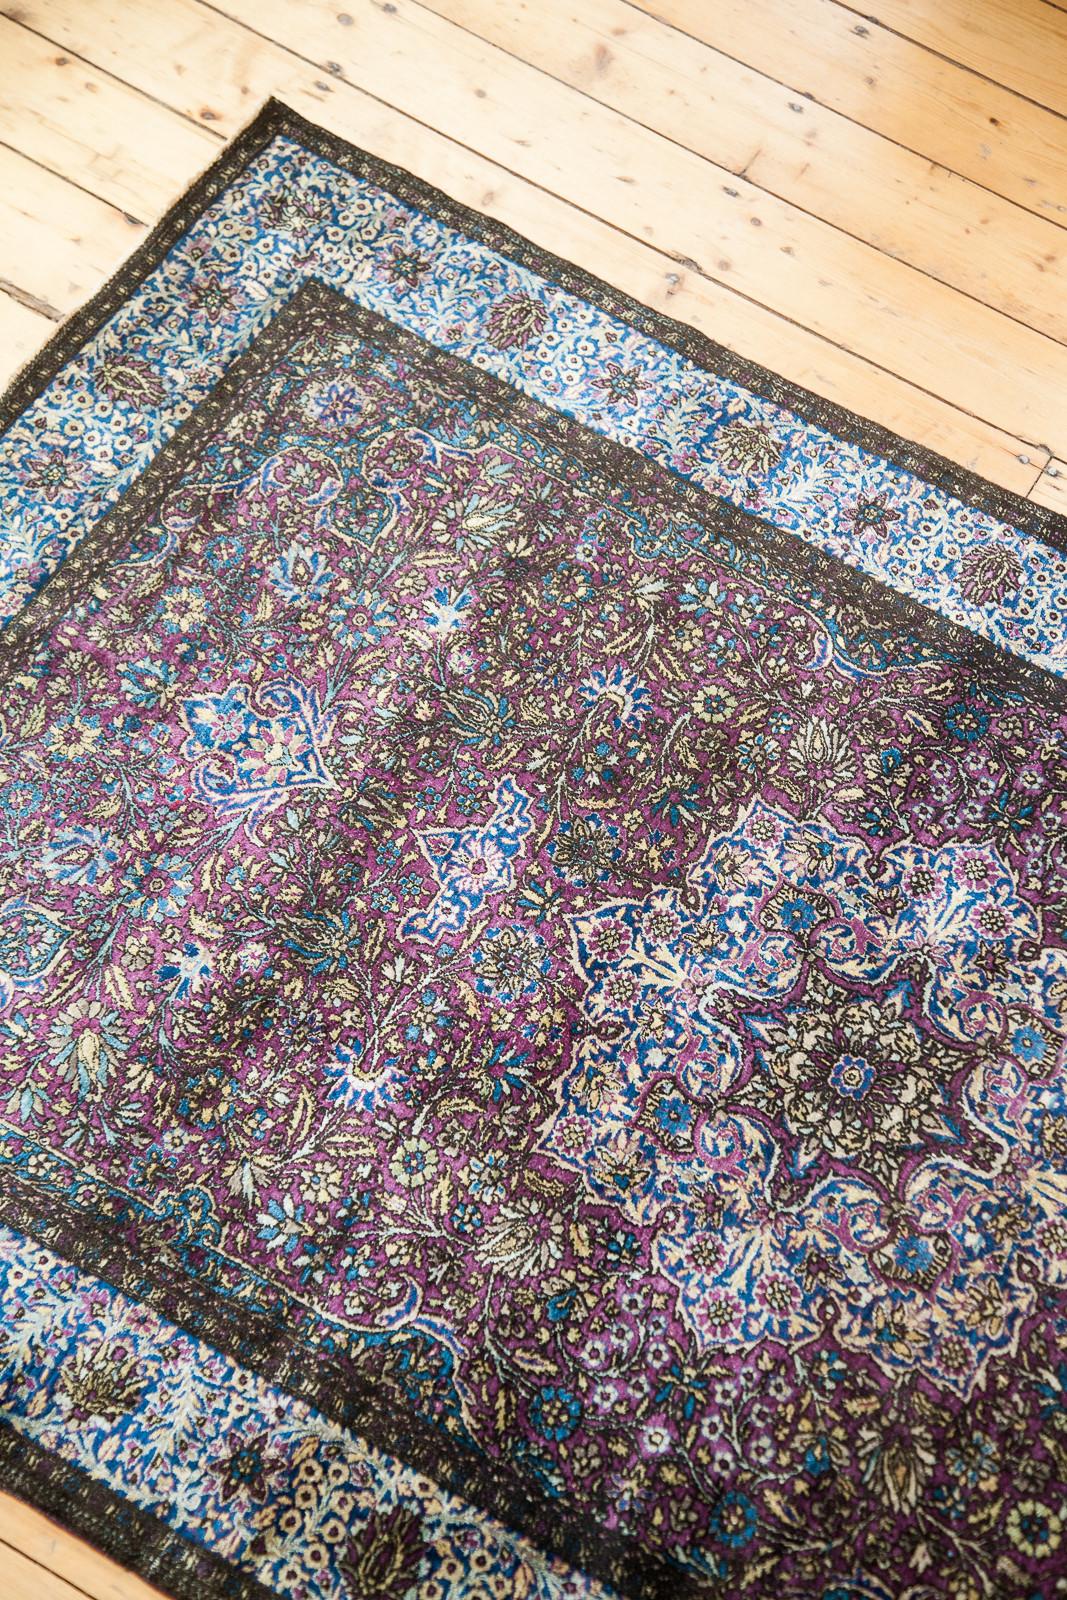 :: Beautiful fine antique silk Persian Kashan area rug conservative weaving date 1915, likely closer to 1900. An interesting and unusual fusion for rugs of this type: traditional Persian workshop carpet with strong European flare in the border